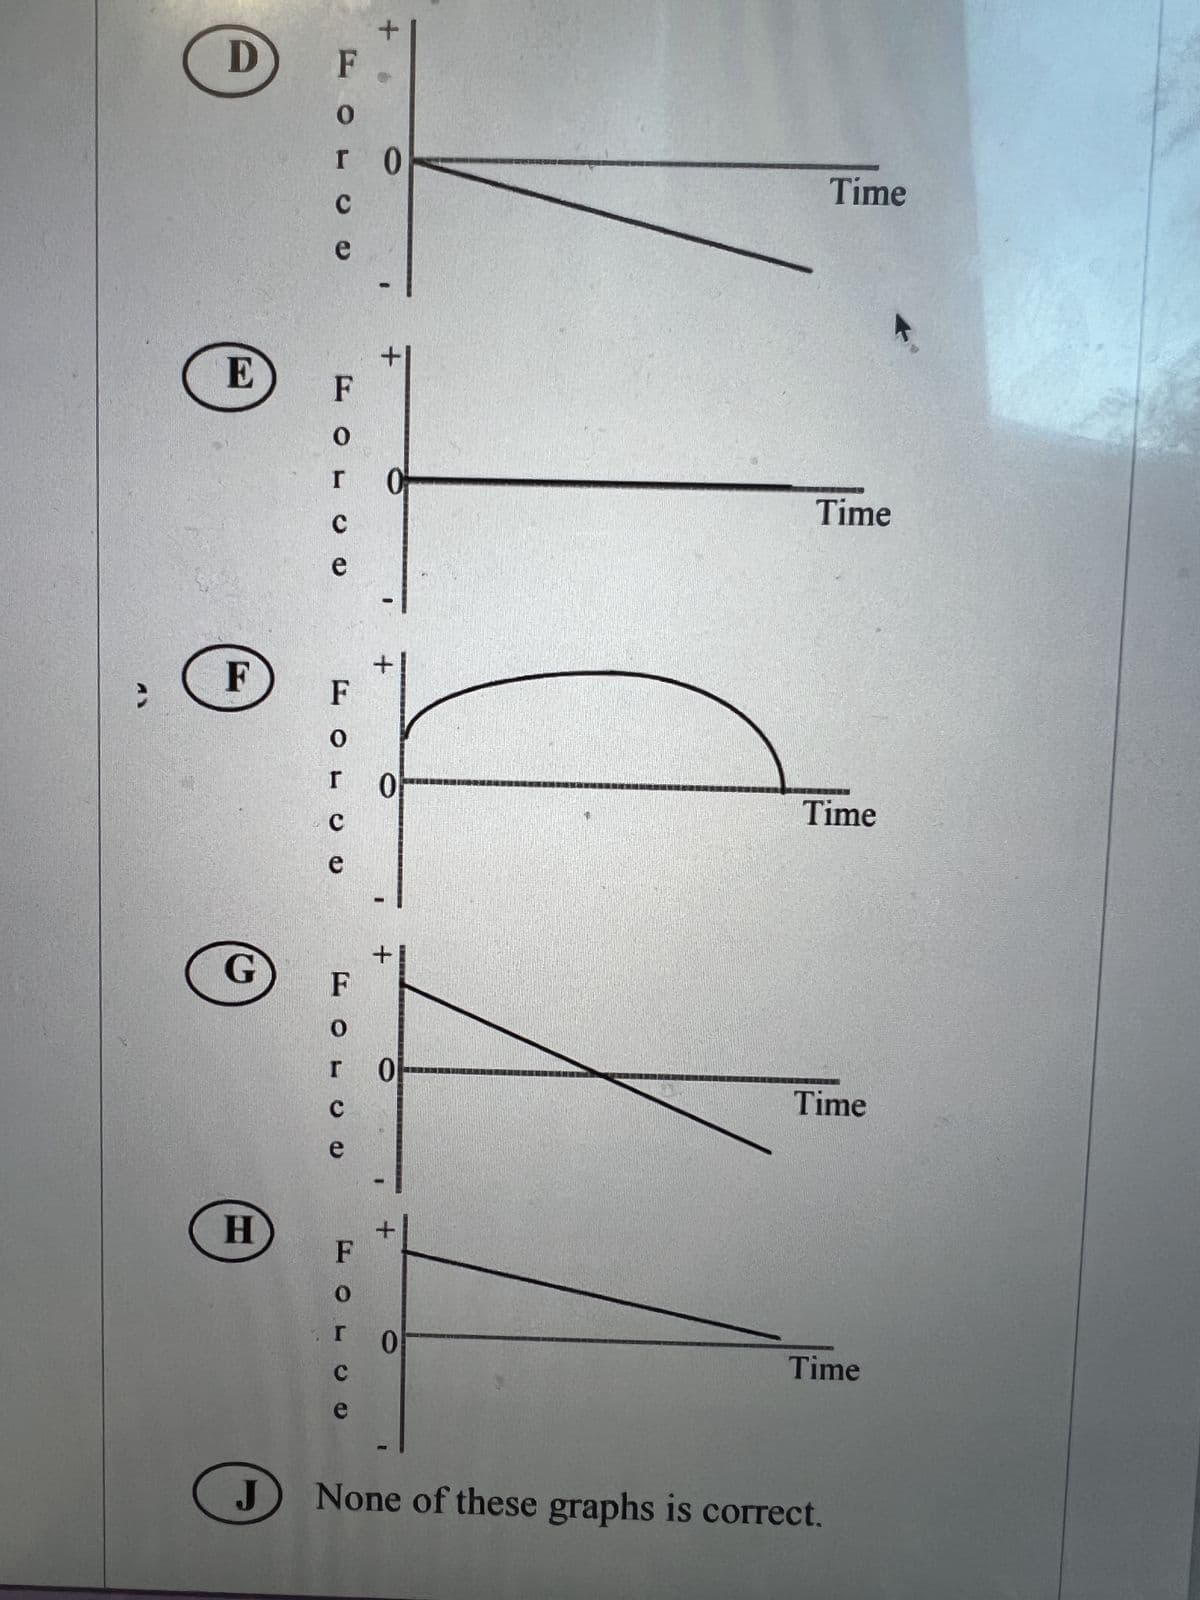 D
E
F
G
H
J
F
0
r 0
C
e
FOLC
e
FOL
0
r
C
e
F
0
r
C
e
F
C
+
+
+
0
+
0
Time
Time
Time
Time
Time
None of these graphs is correct.